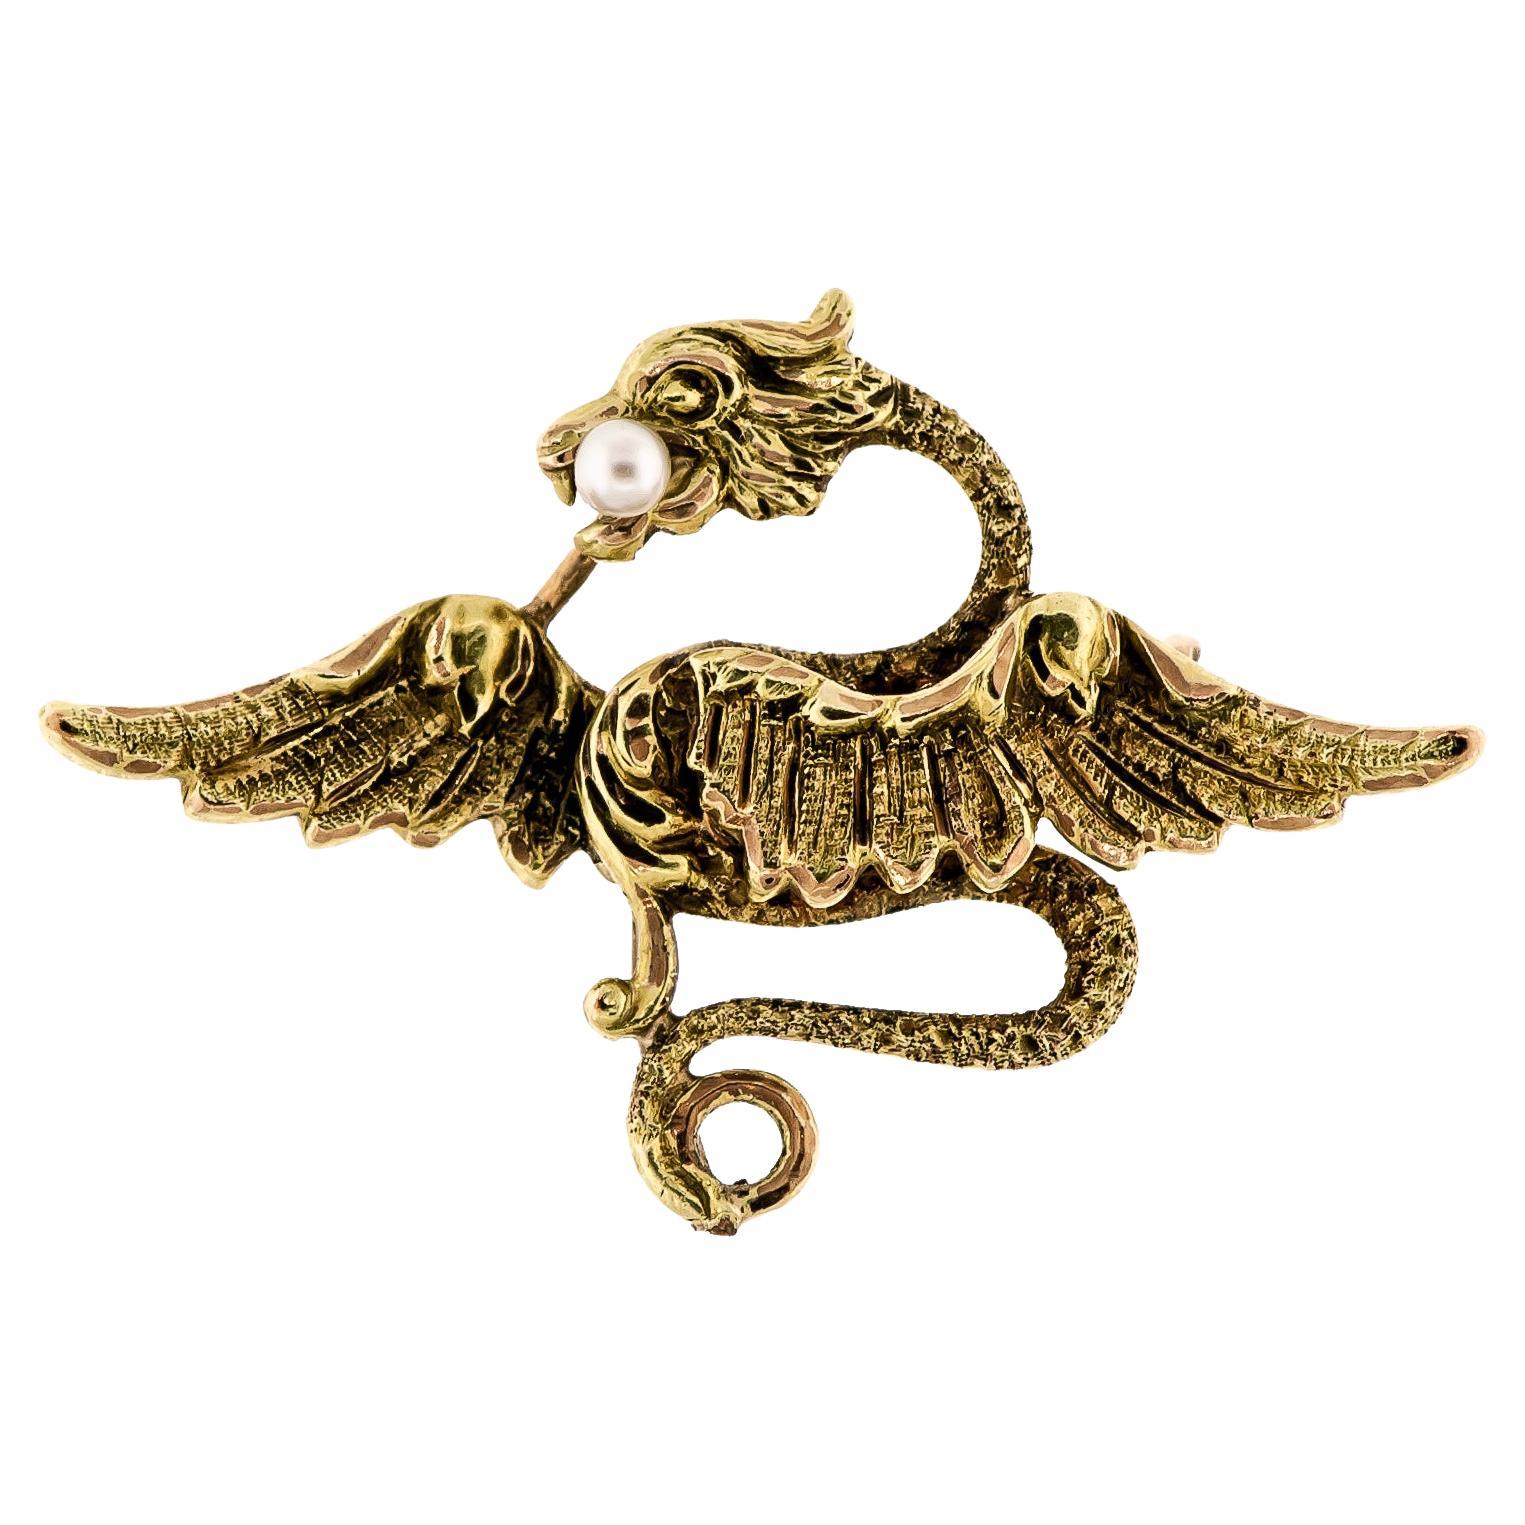 Wonderful Turn of the Century Chimera Brooch For Sale